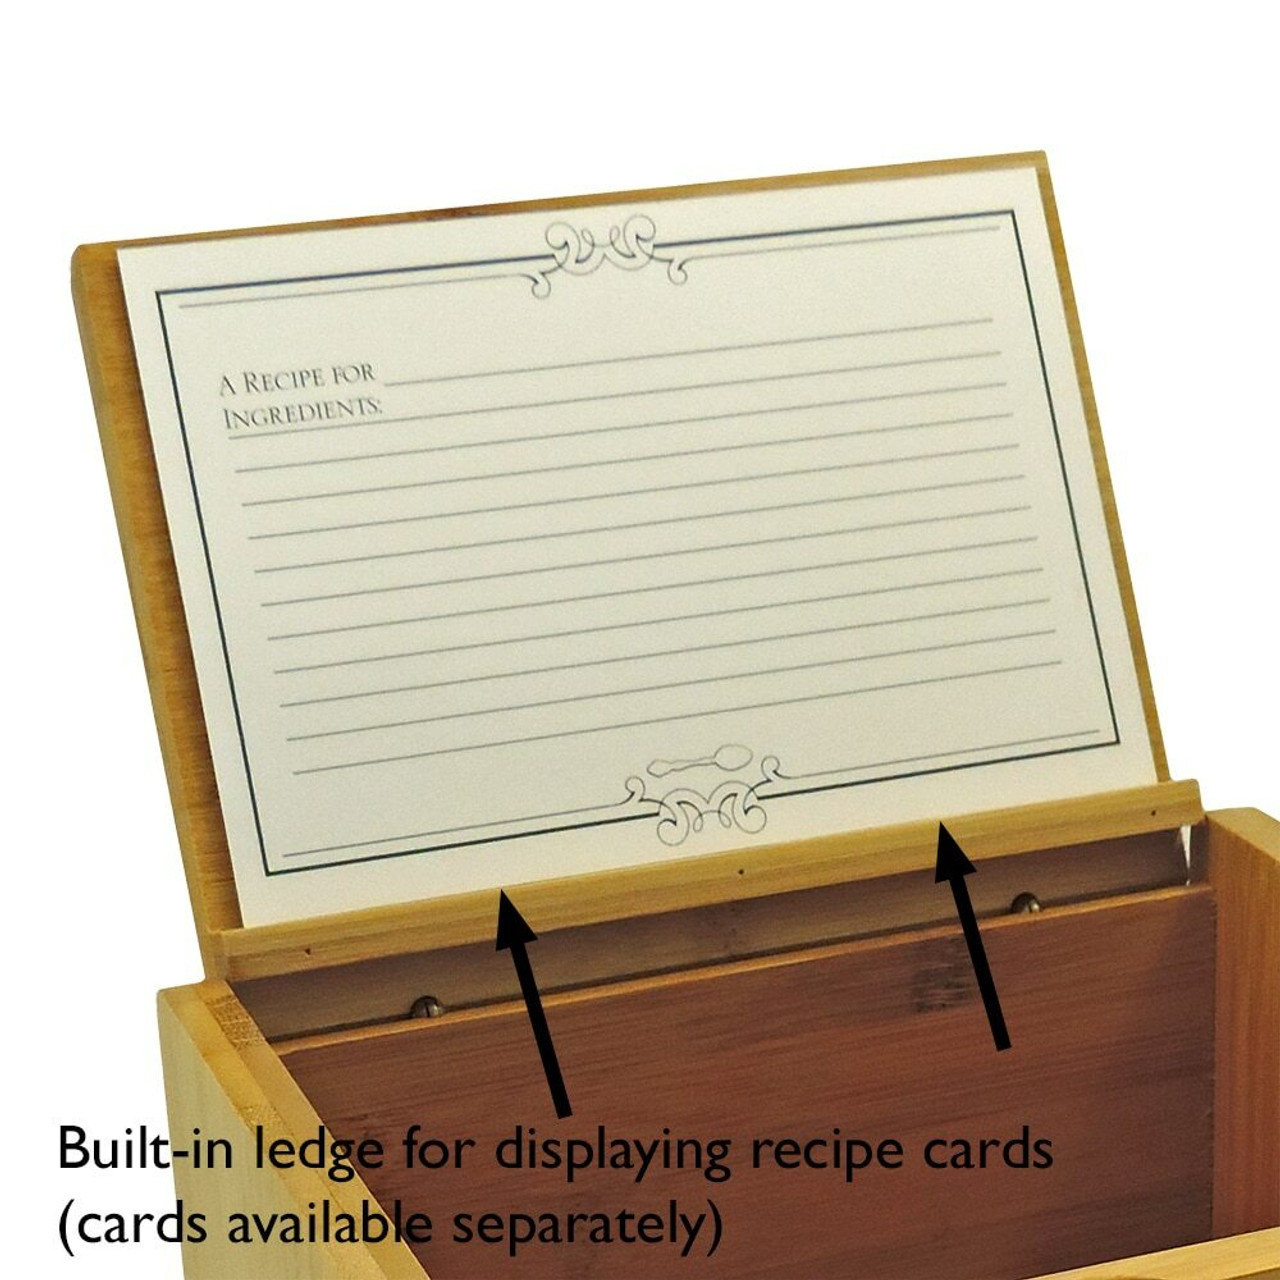 Personalized Recipe Cards and Box for Mom